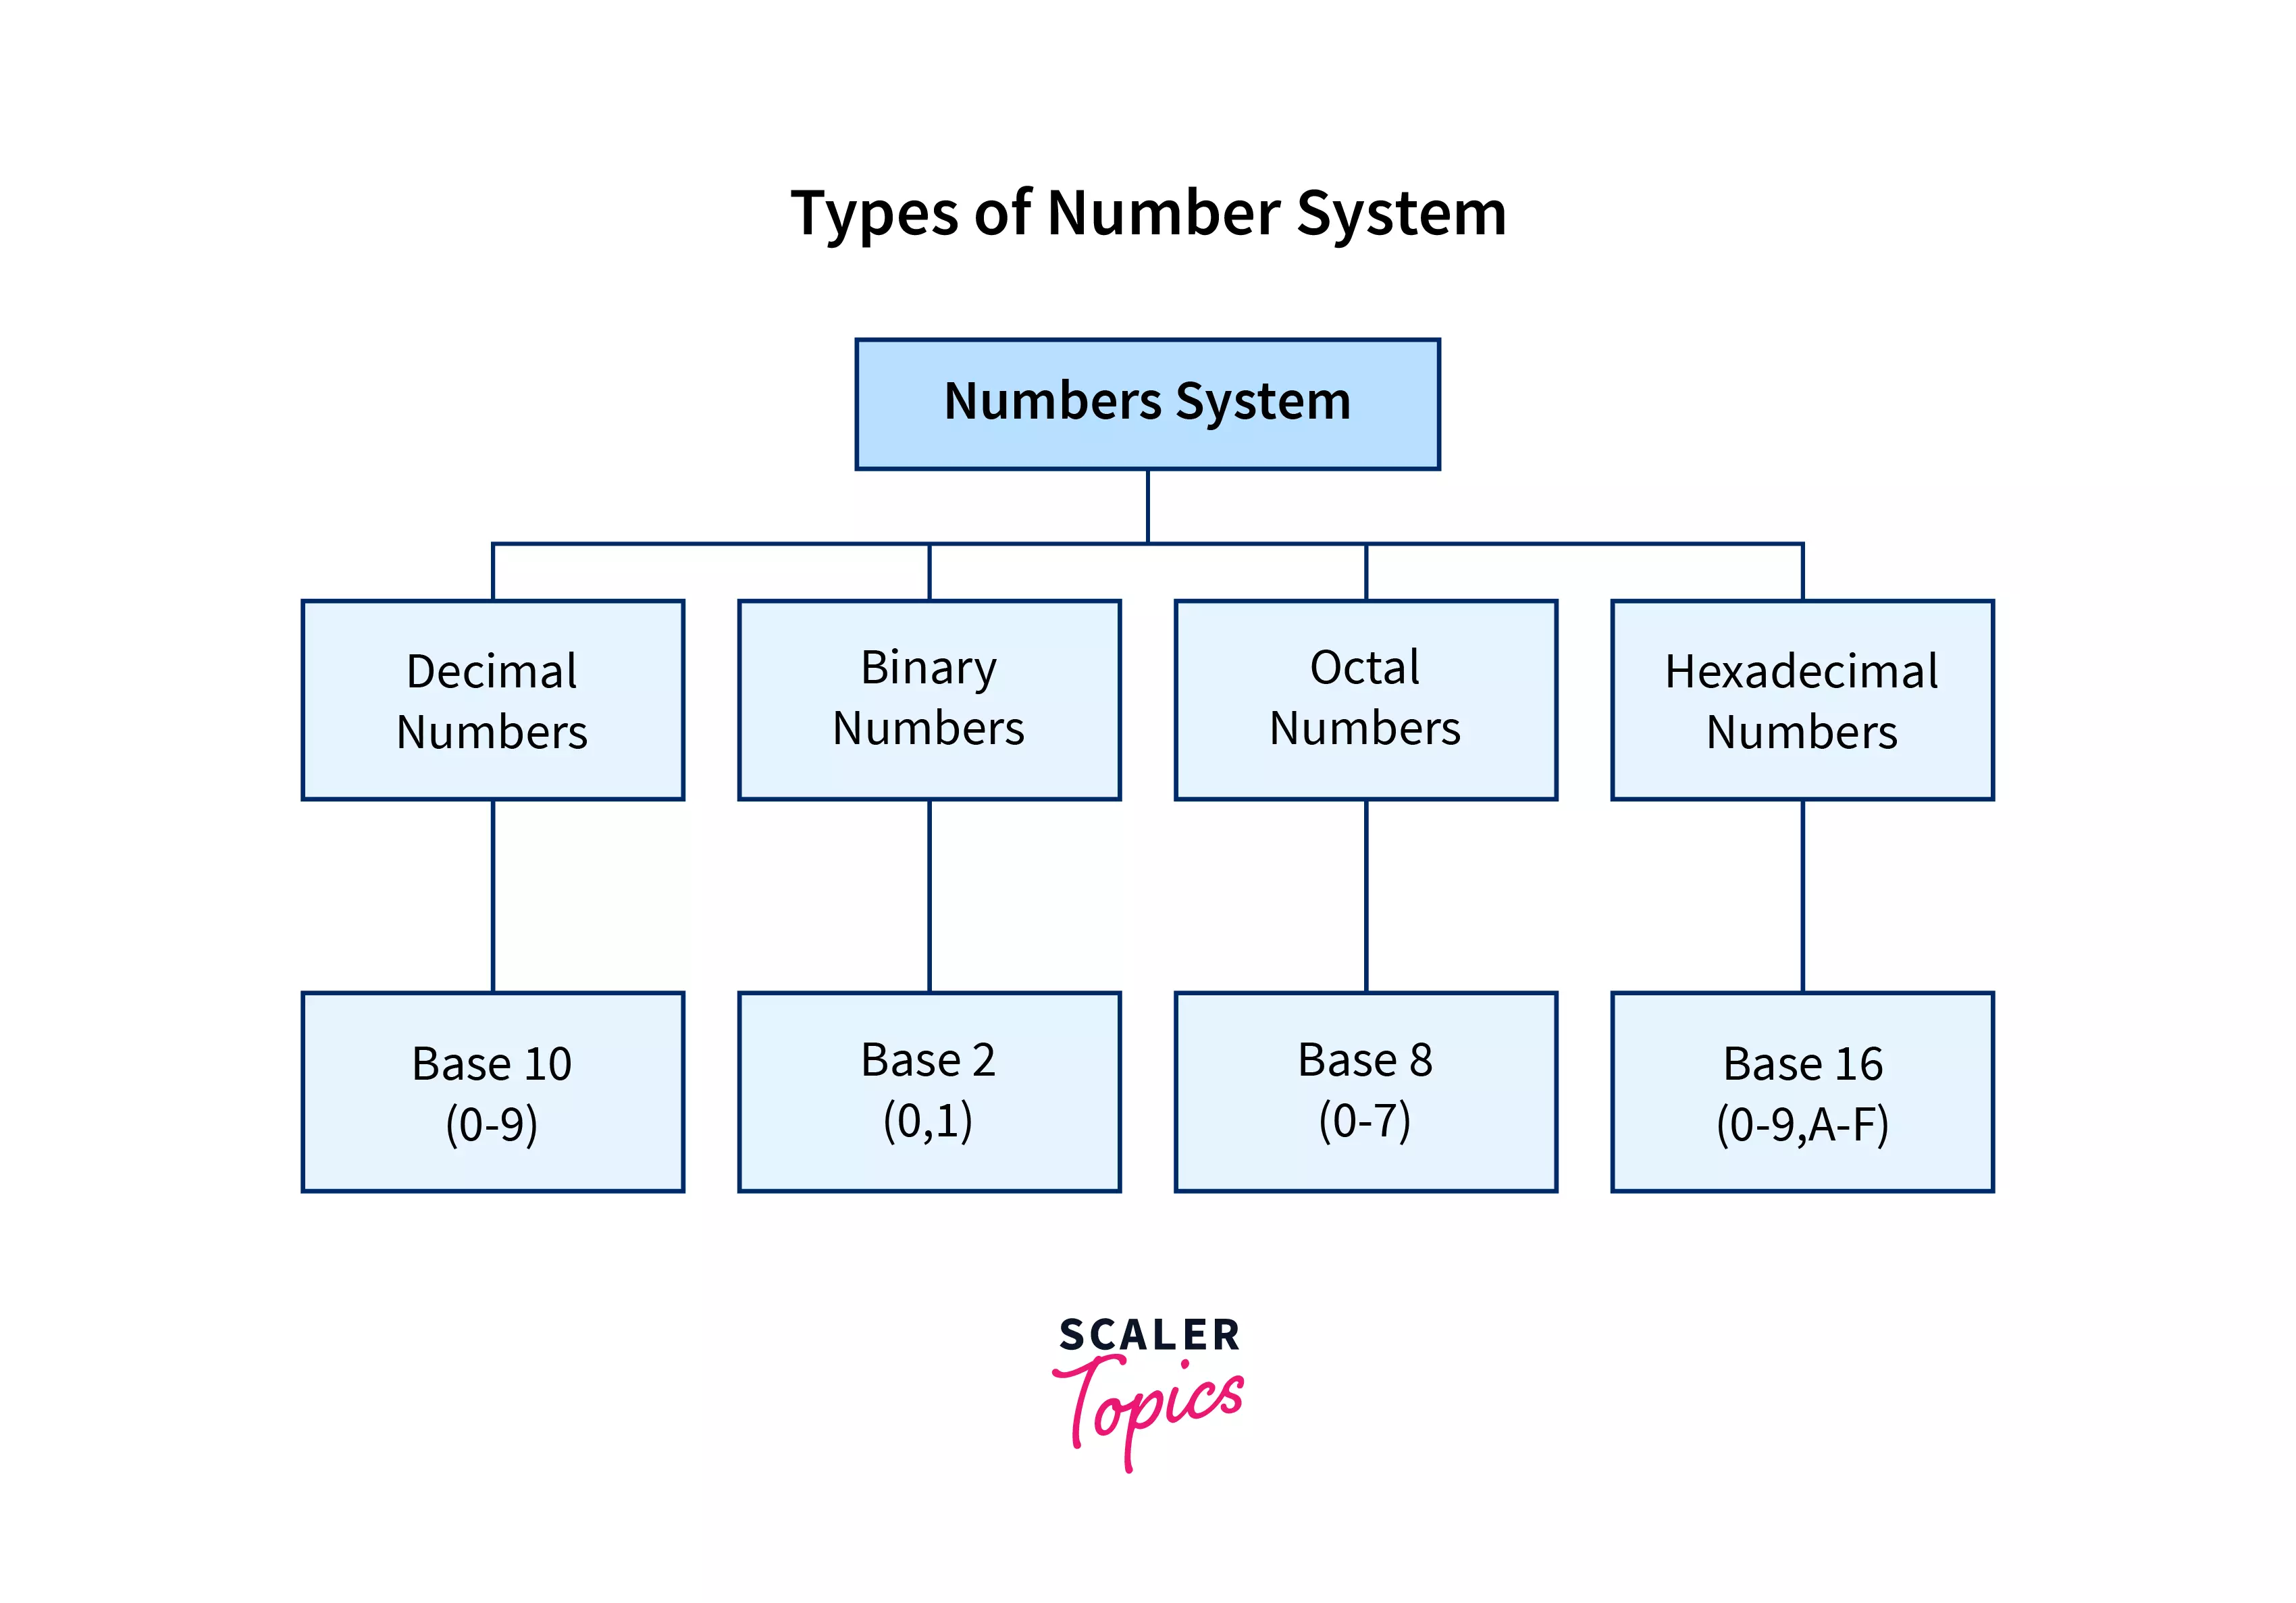 Types of number system